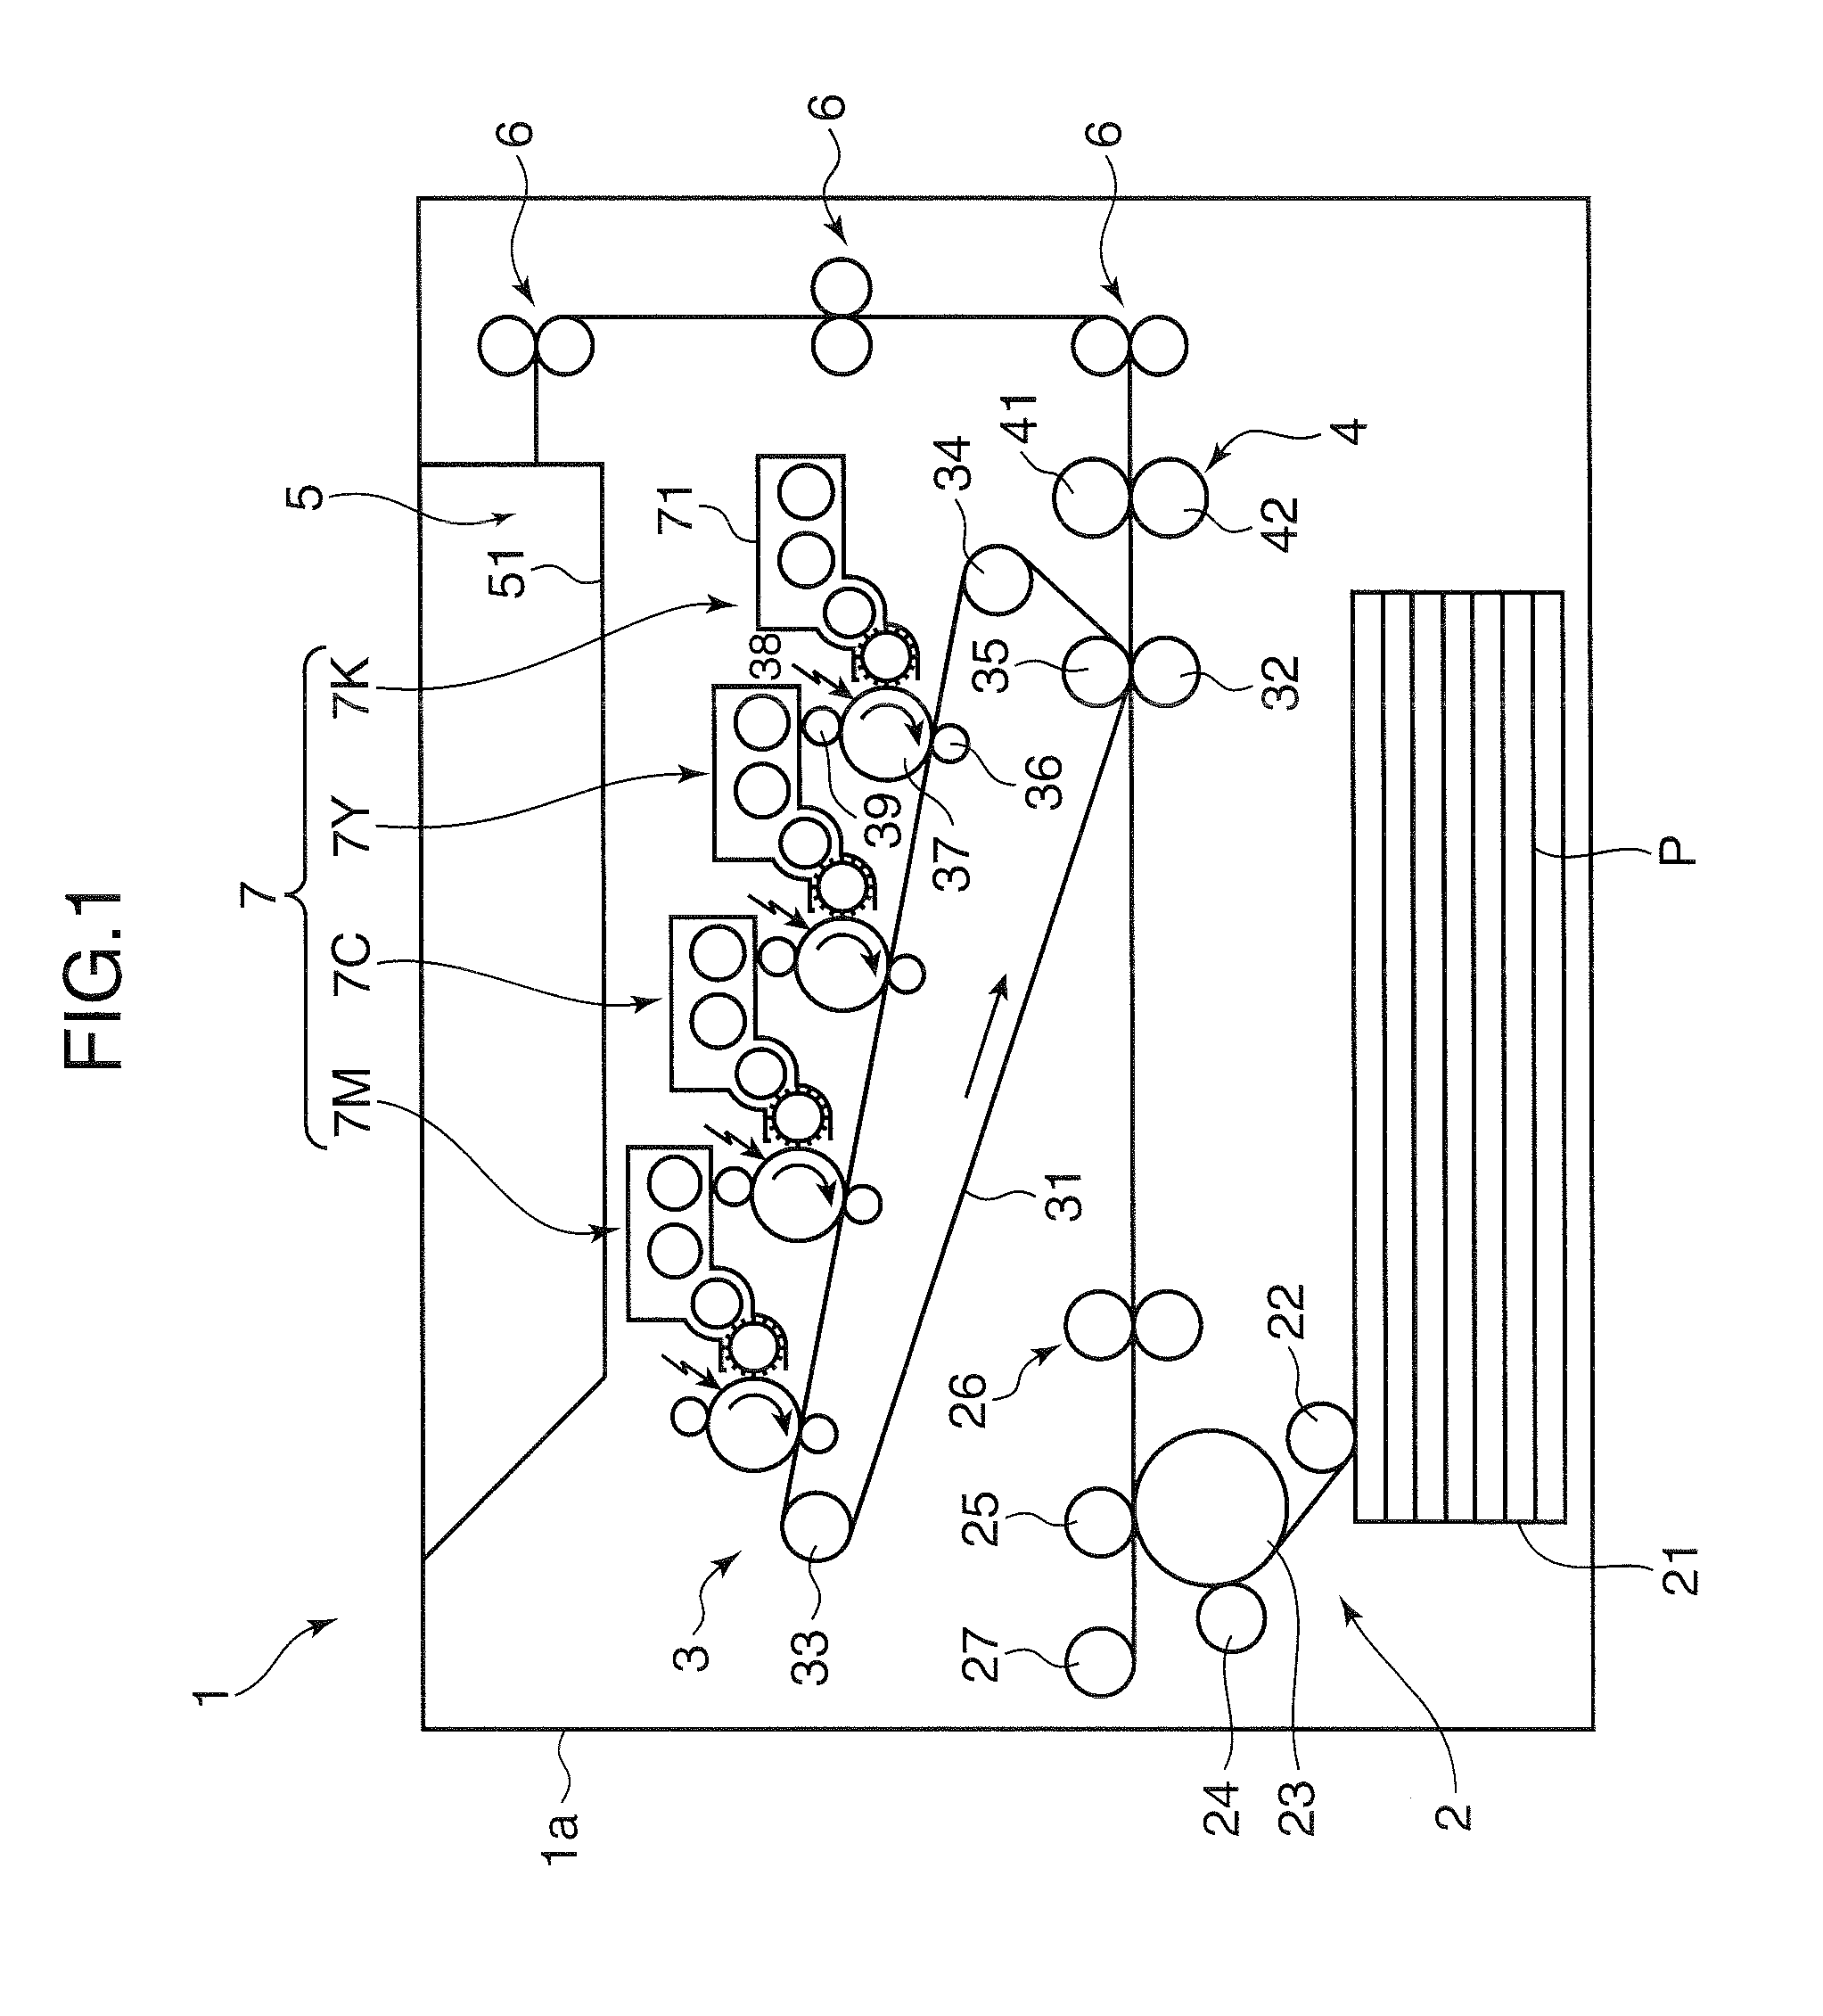 Developing unit and image forming apparatus